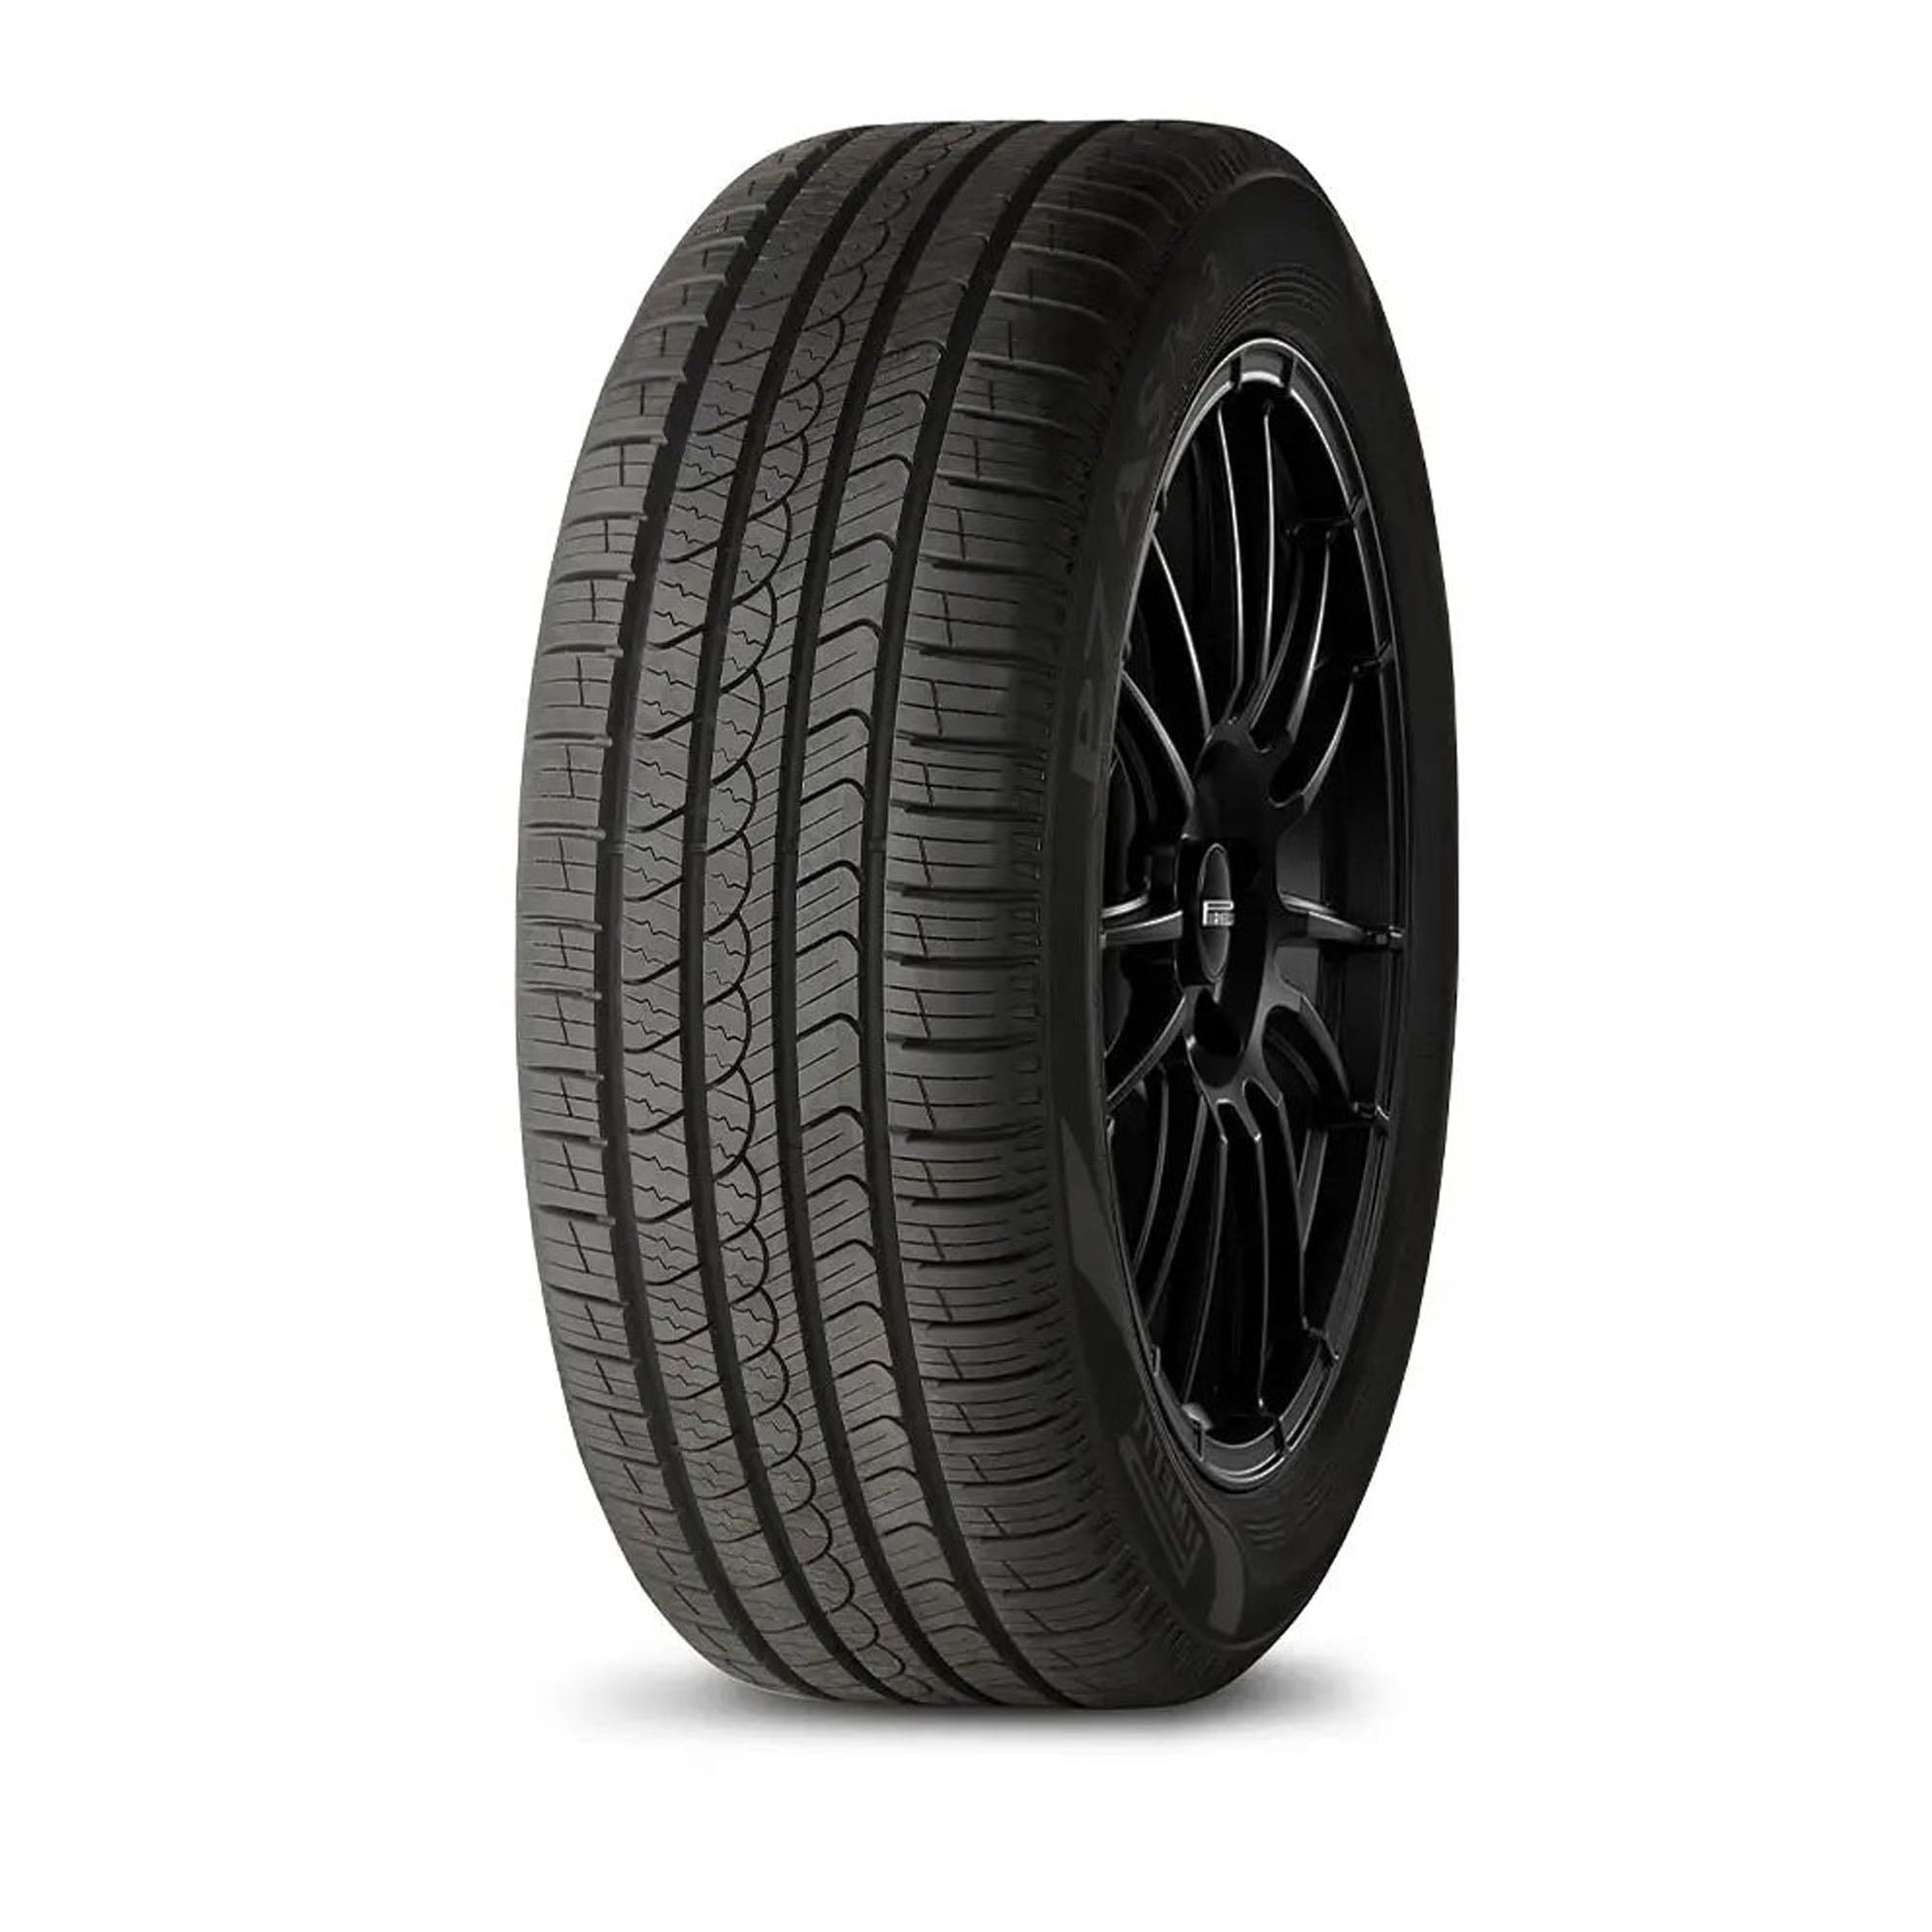 Continental ExtremeContact DWS06 PLUS All Season 245/35ZR18 92Y XL